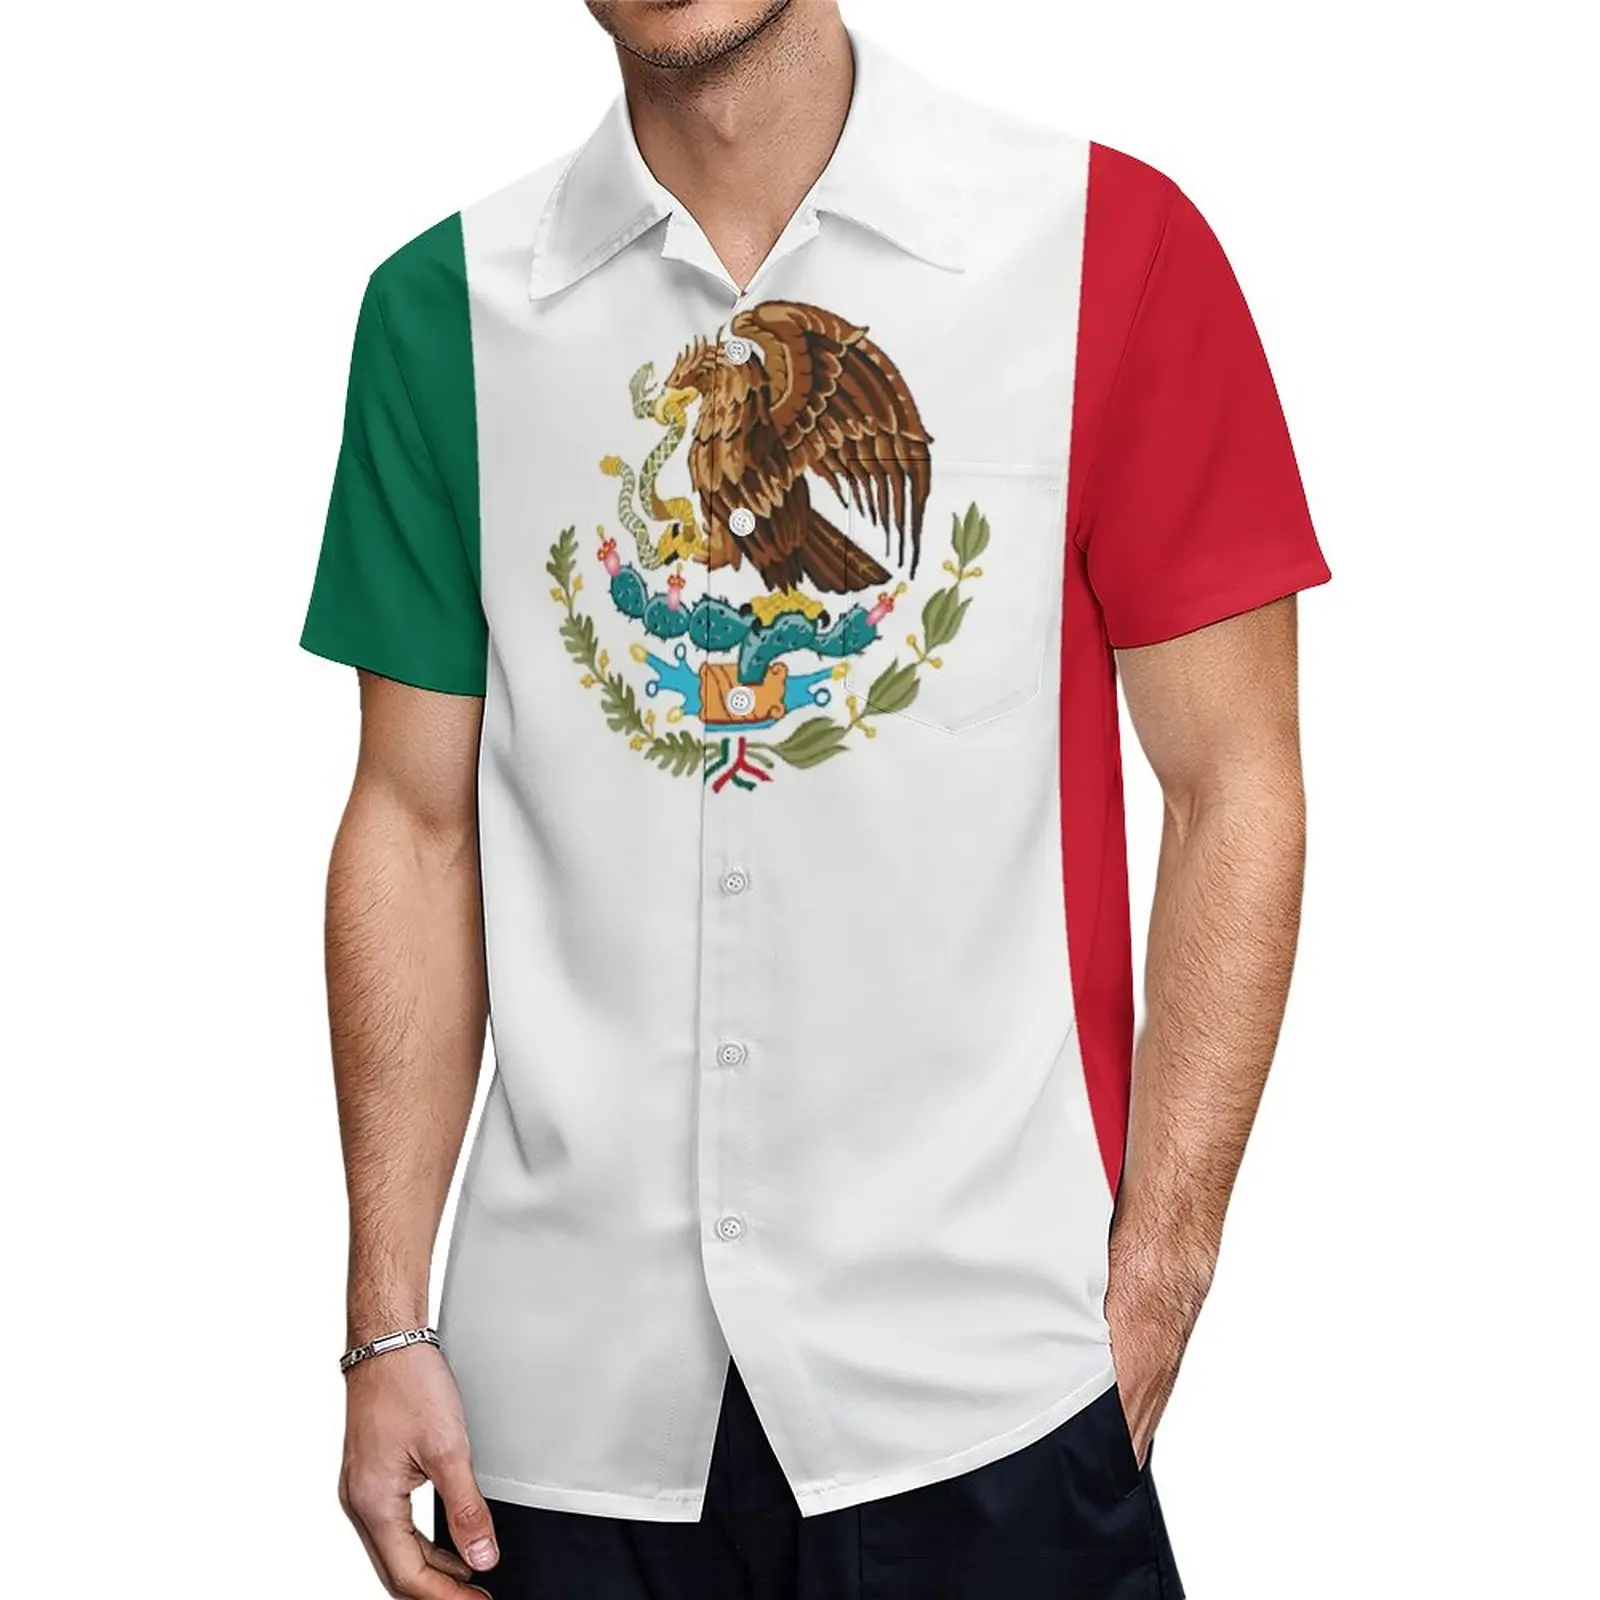 

Mexican Flag Tees Funny Graphic Coordinates High Quality A Short Sleeved Shirt Going Out Eur Size